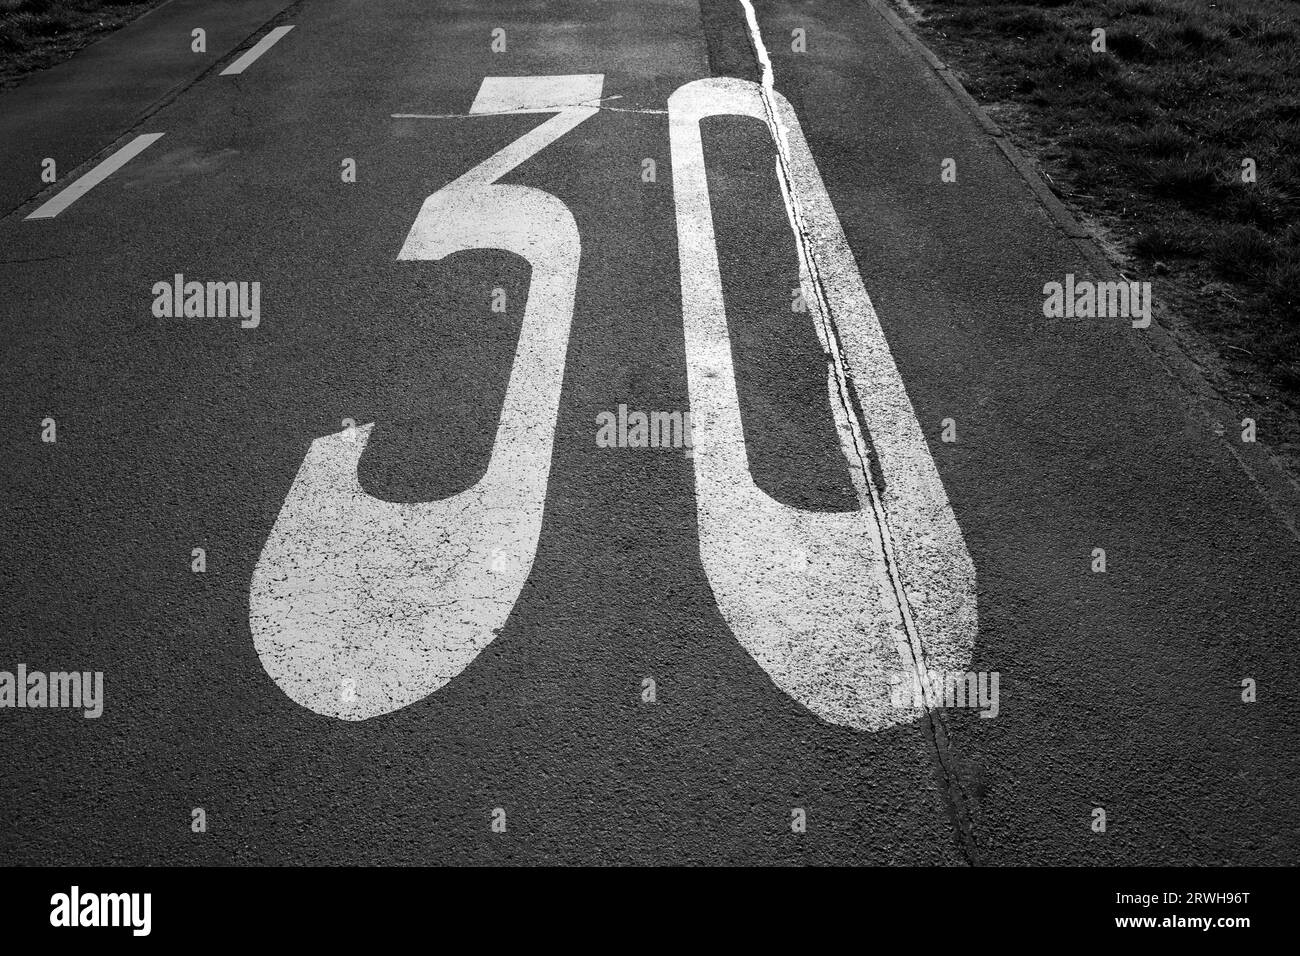 Painted number 30 for speed limit on a road in black and white Stock Photo